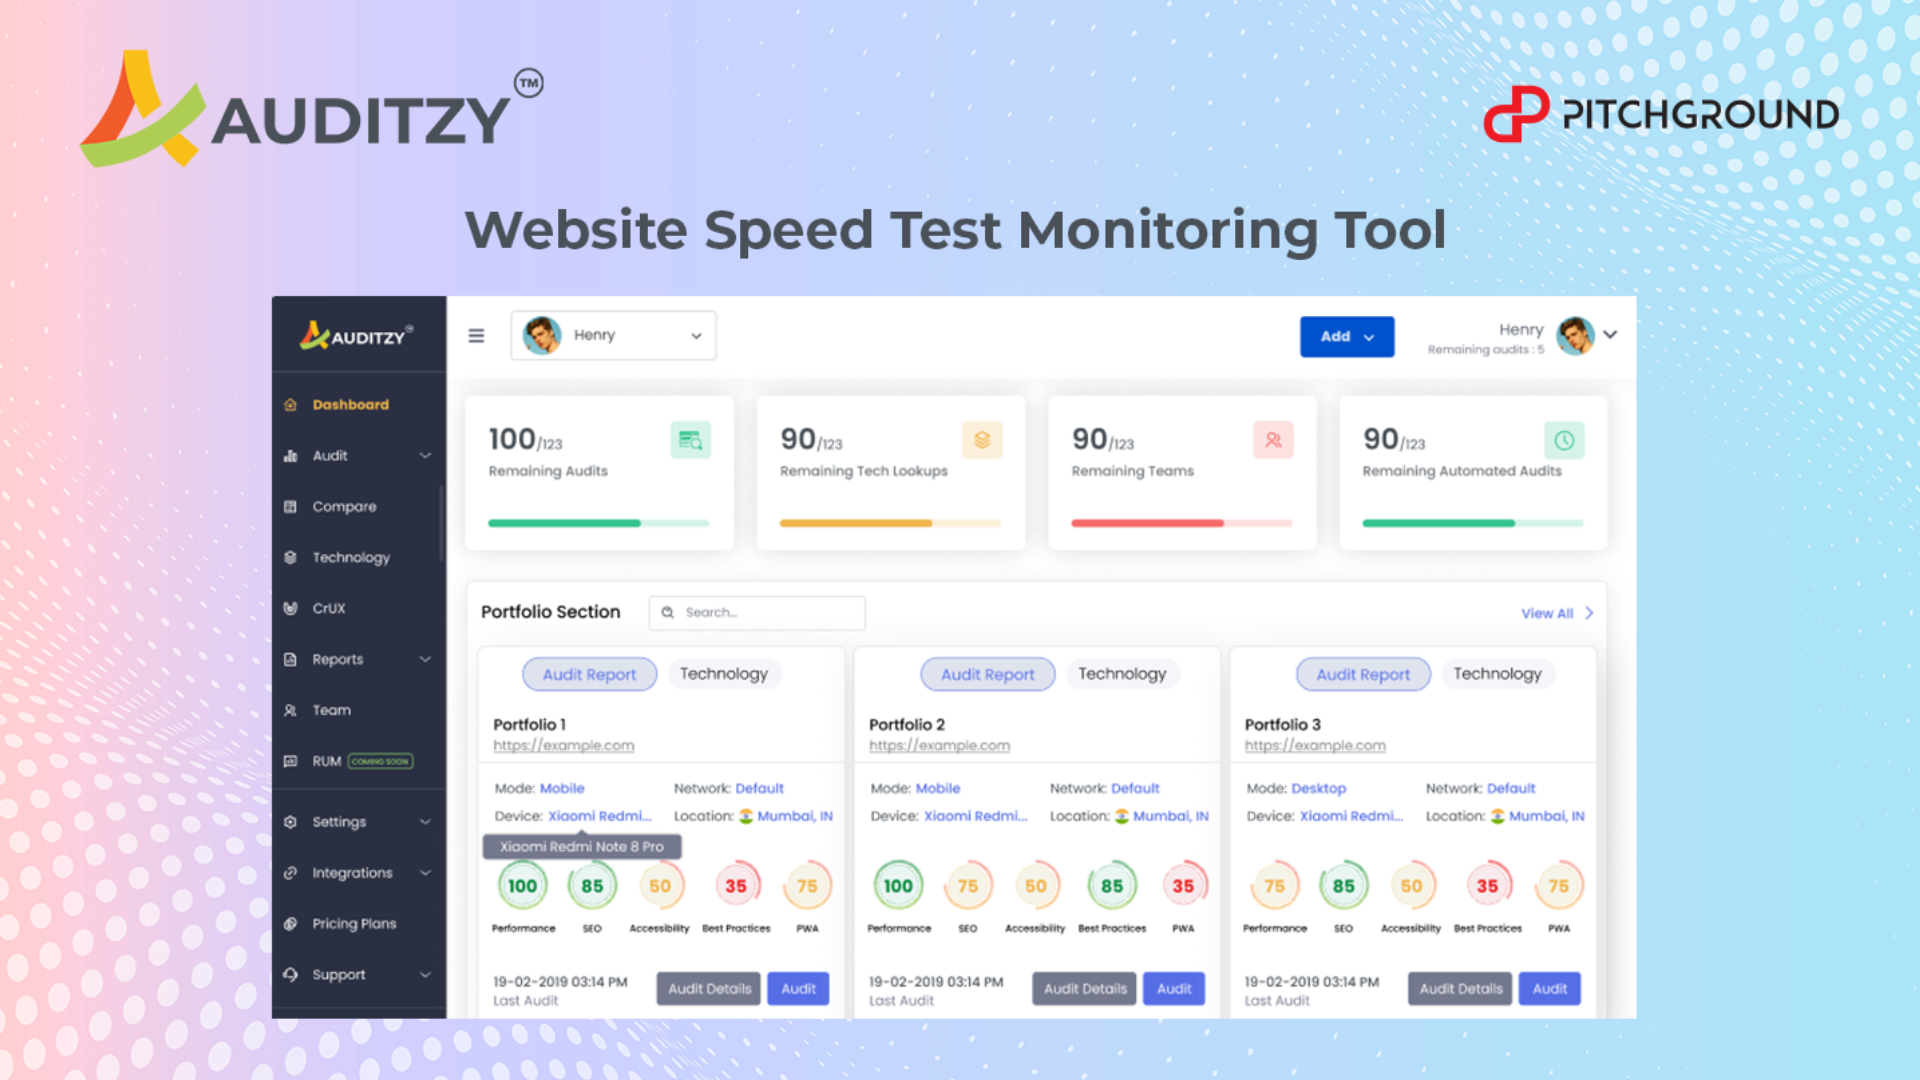 Lifetime Deal to Auditzy: Plan A (Hobby) for $49